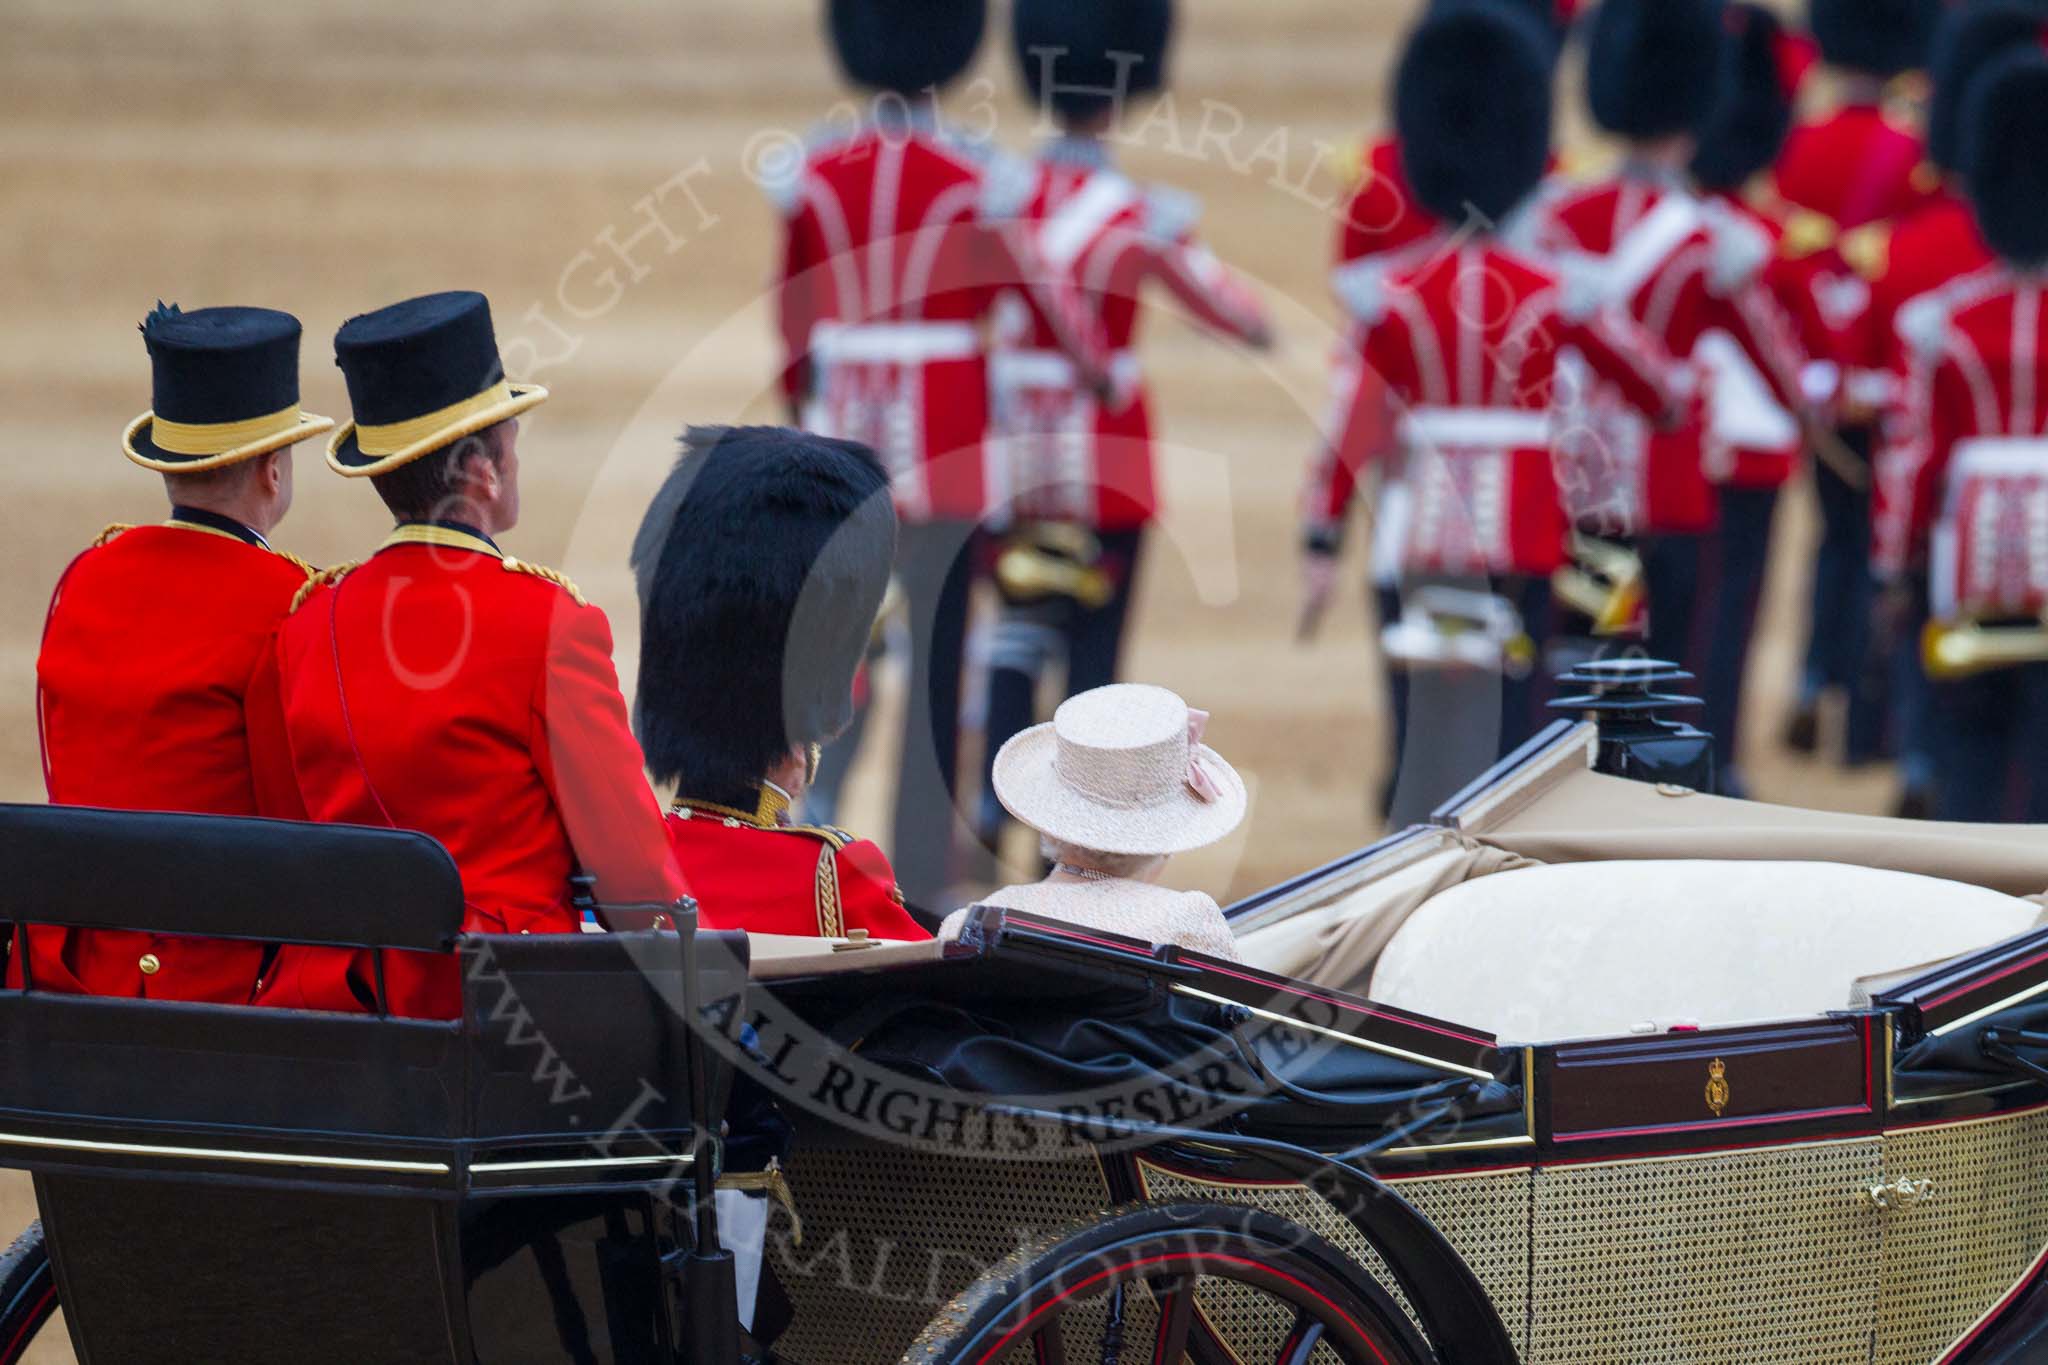 Trooping the Colour 2015. Image #673, 13 June 2015 12:10 Horse Guards Parade, London, UK